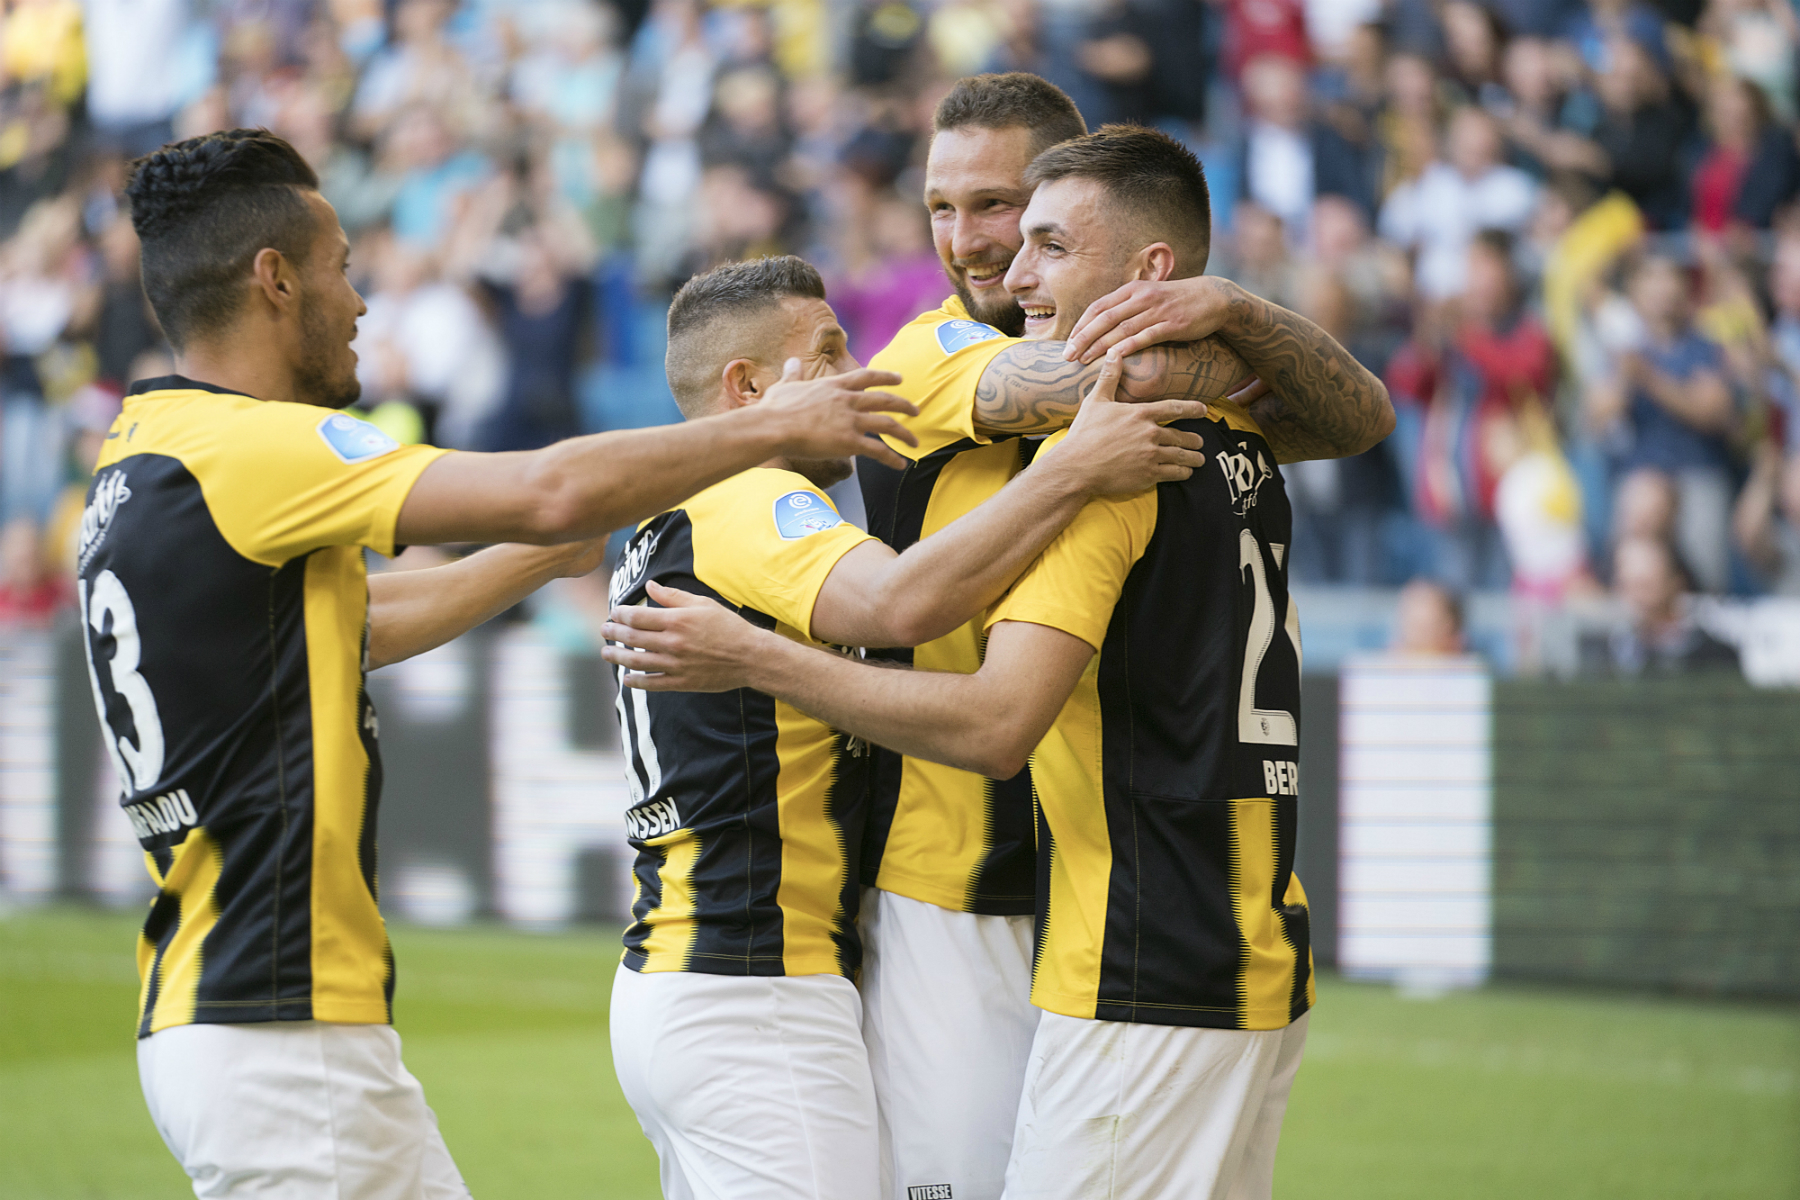 Matus Beto celebrates his winning penalty for Vitesse with Oussama Darfalou and Bryan Linssen